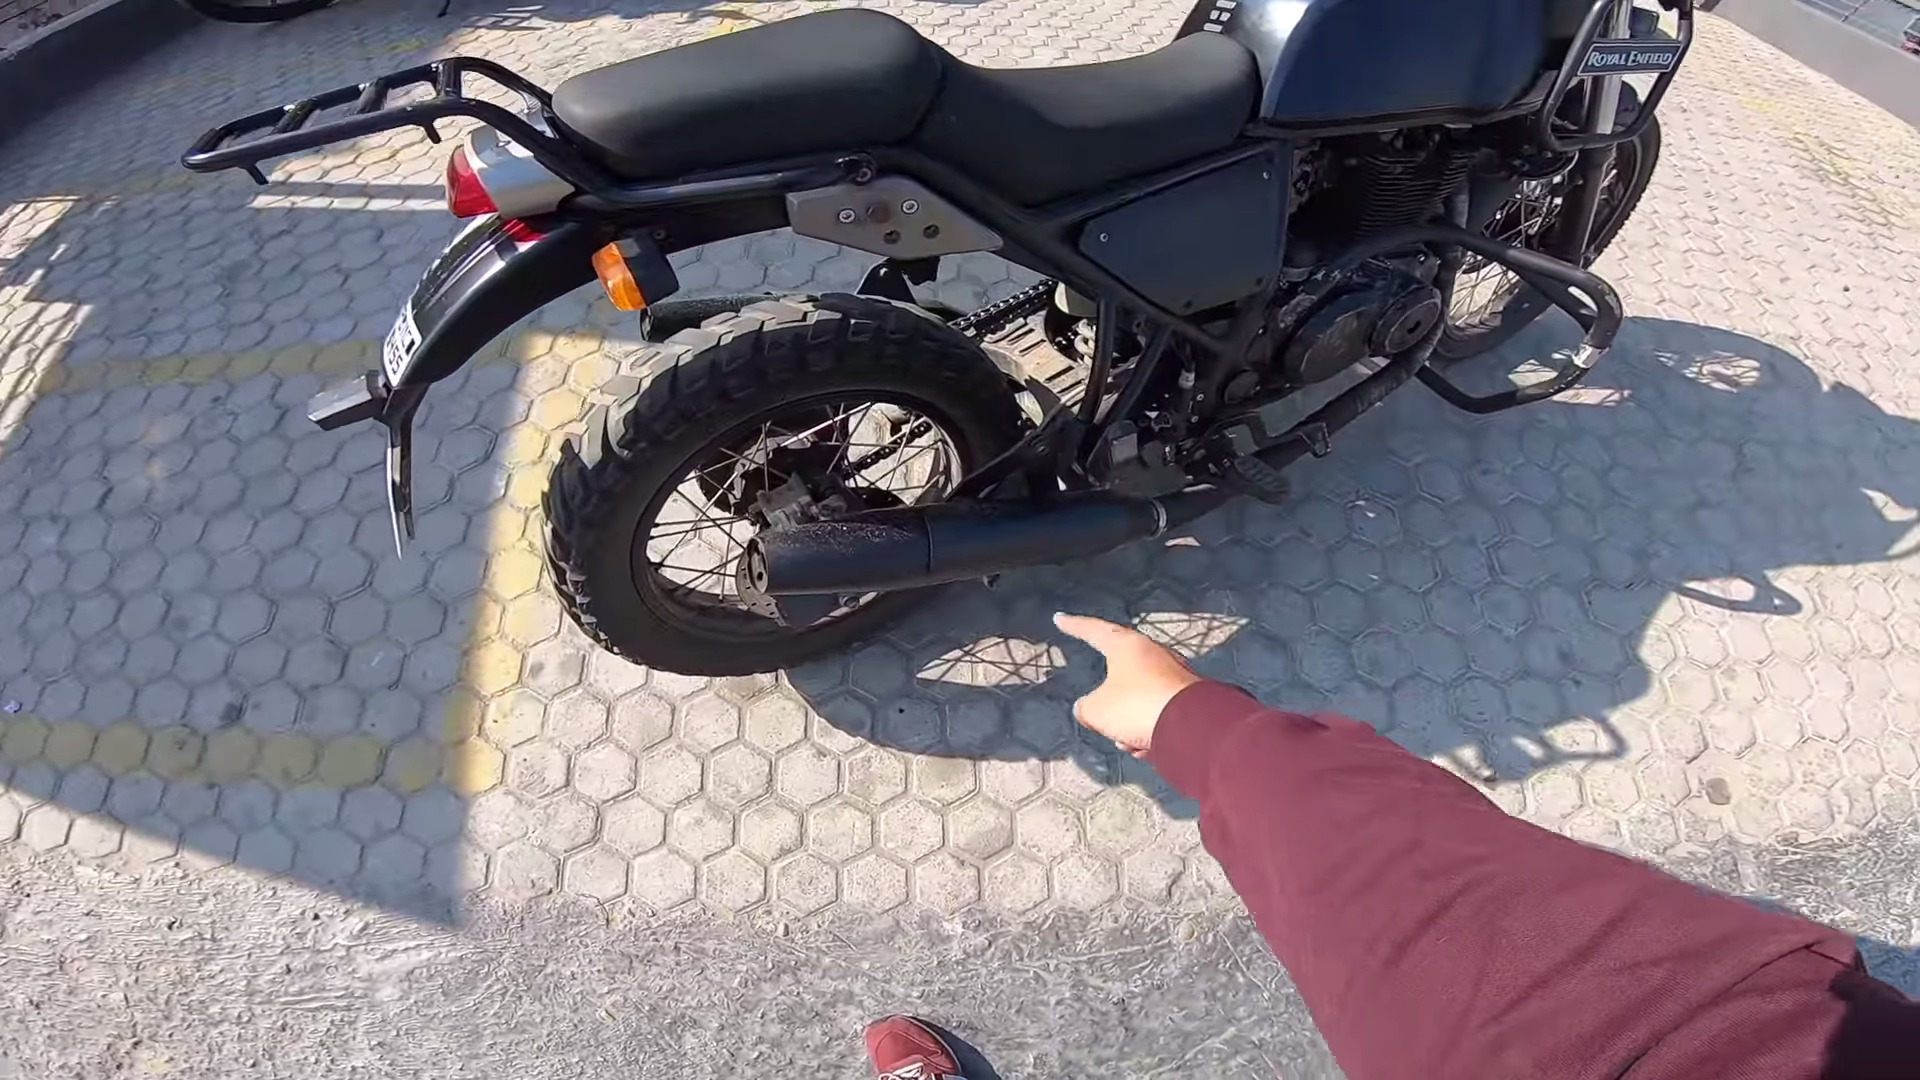 400cc Twin-Cylinder Royal Enfield Himalayan Details & Video - wide